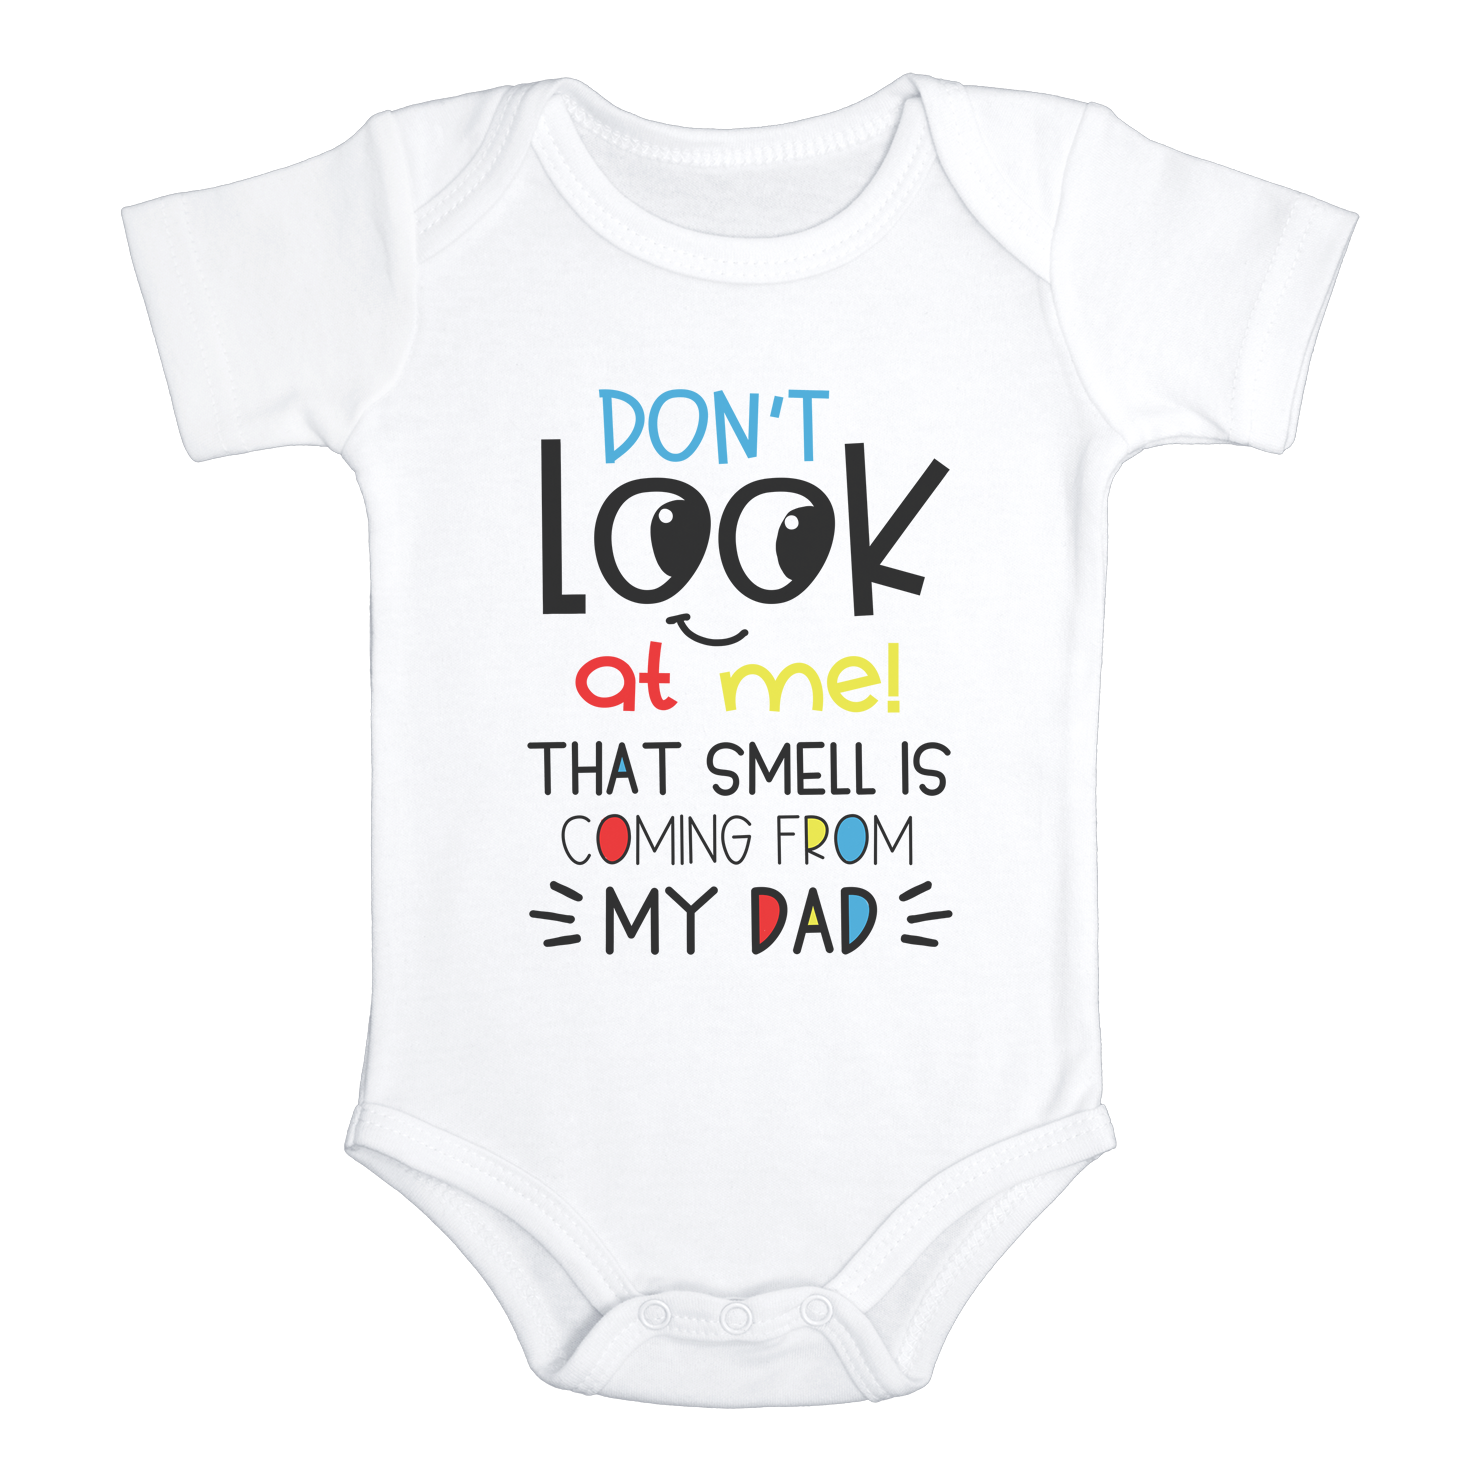 DON'T LOOK AT ME THAT SMELL IS COMING FROM MY DAD - HappyAddition